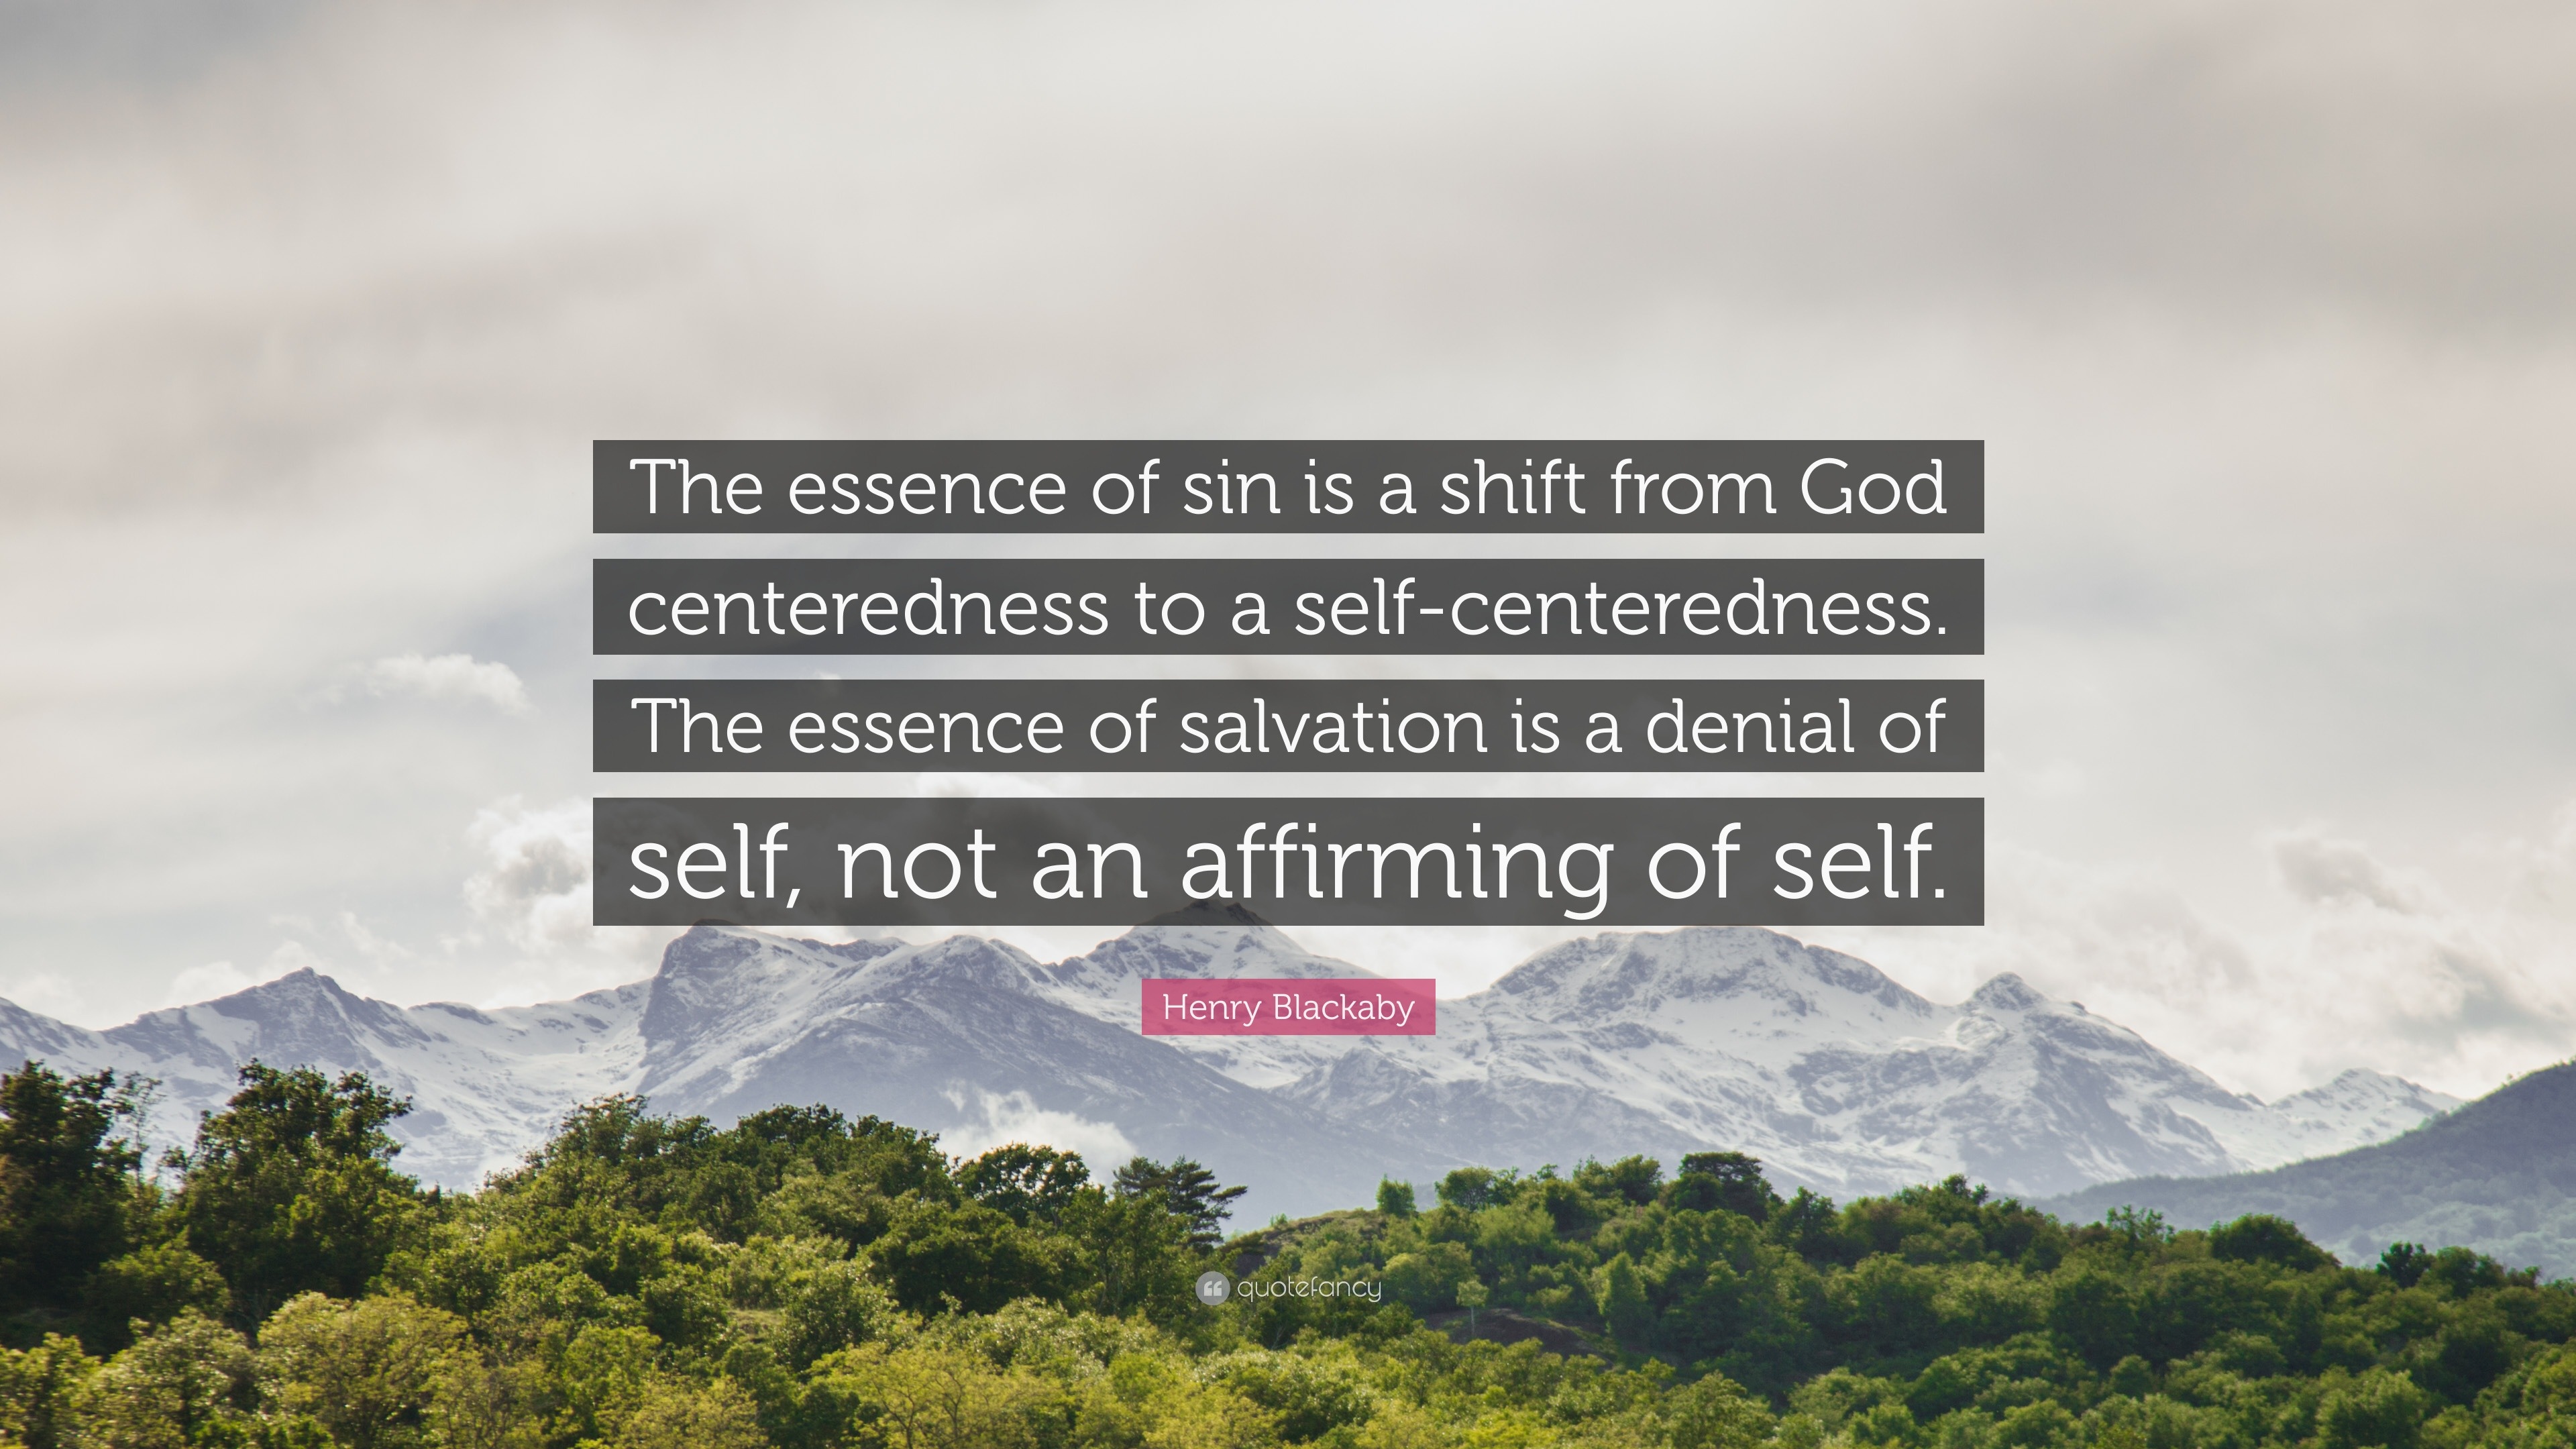 Henry Blackaby Quote: “The essence of sin is a shift from God